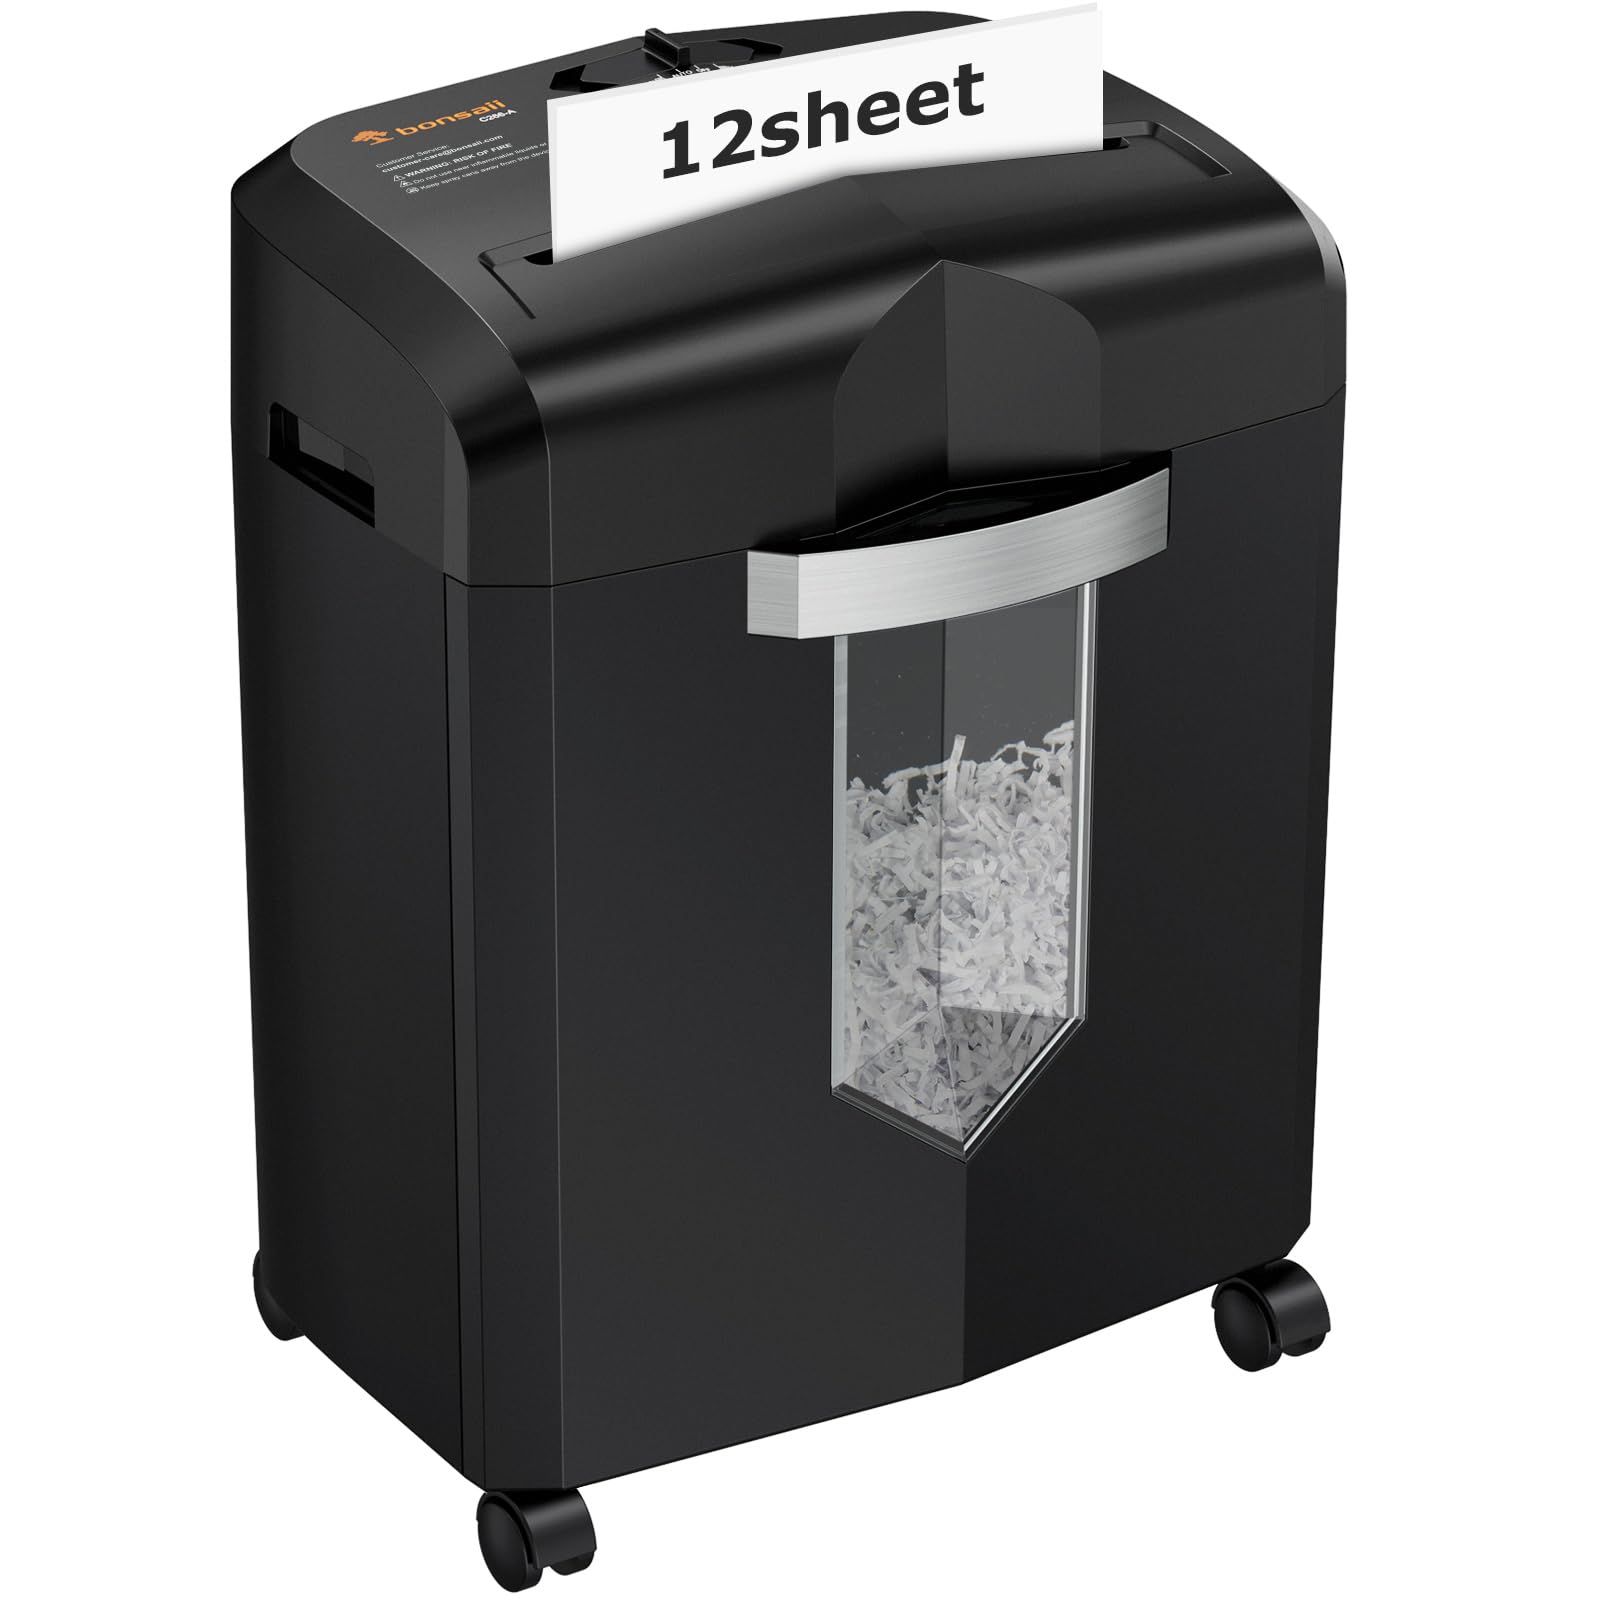 Bonsaii Paper Shredder, 12-Sheet Cross-Cut Shredder for Home Office Use, 20-Minutes Heavy Duty Shredder with 4.2 Gal Pullout Bin & 4 Casters for Credit Card Jam-Proof Shredding Machine (C266-A)